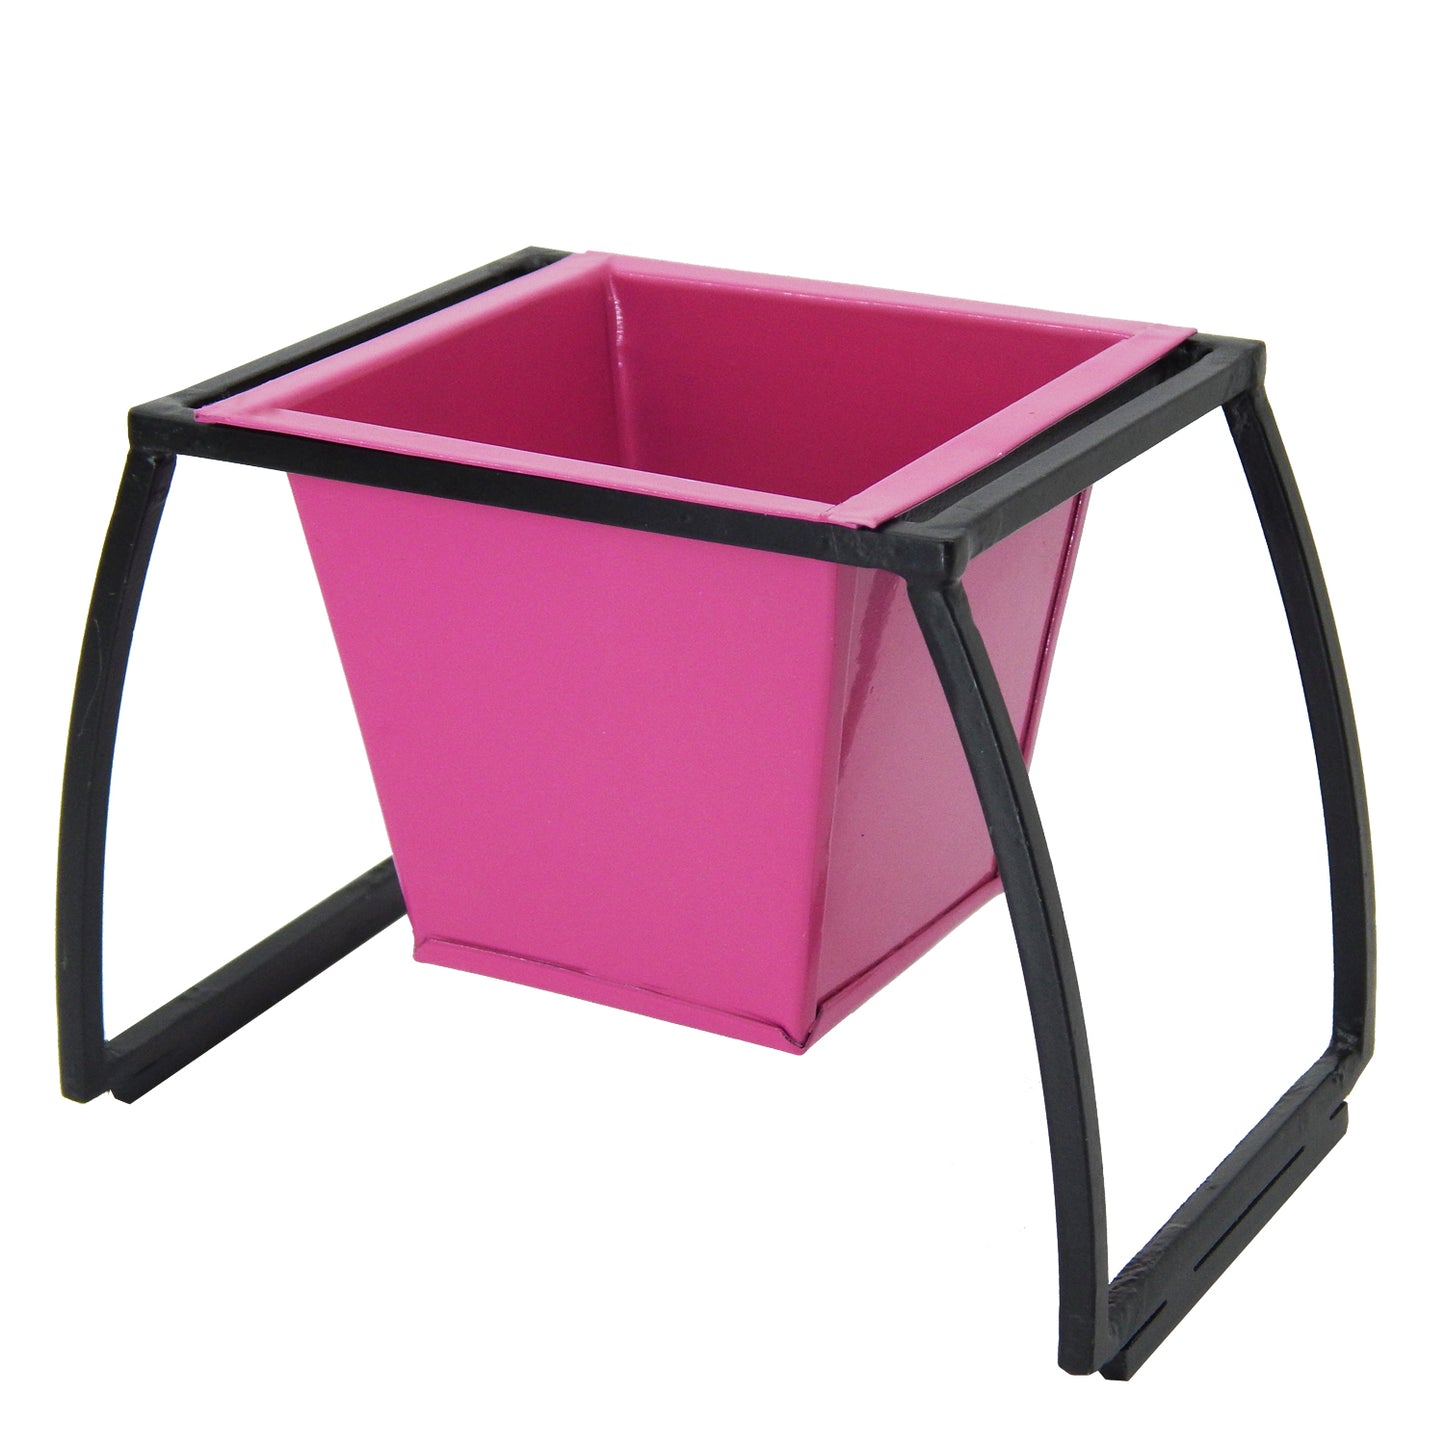 ecofynd Stackable Table Top Planter Pot with Metal Stand, Pink Desktop Planter freeshipping - Ecofynd